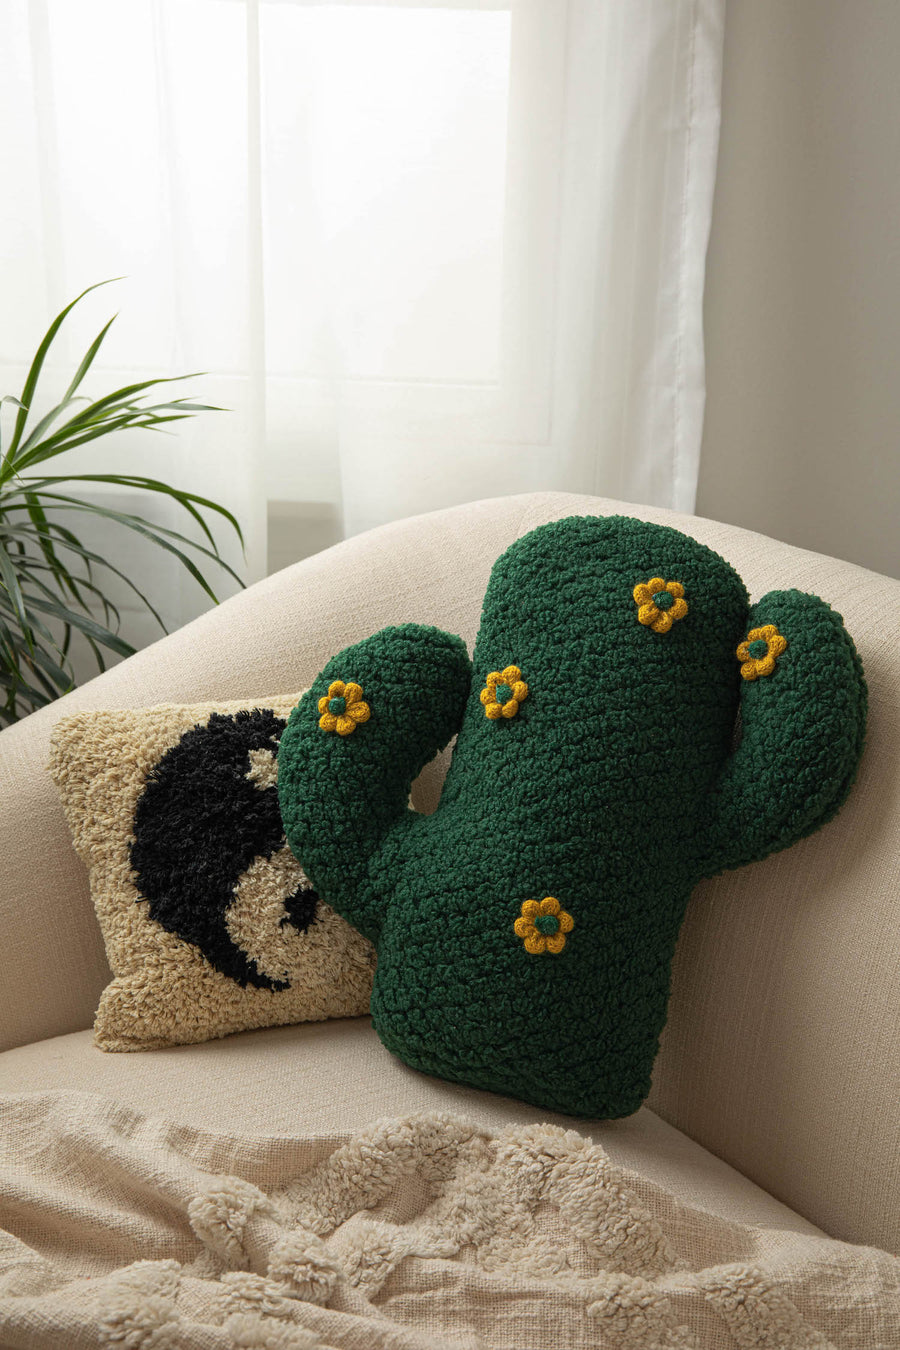 Cactus Throw Pillow On Couch